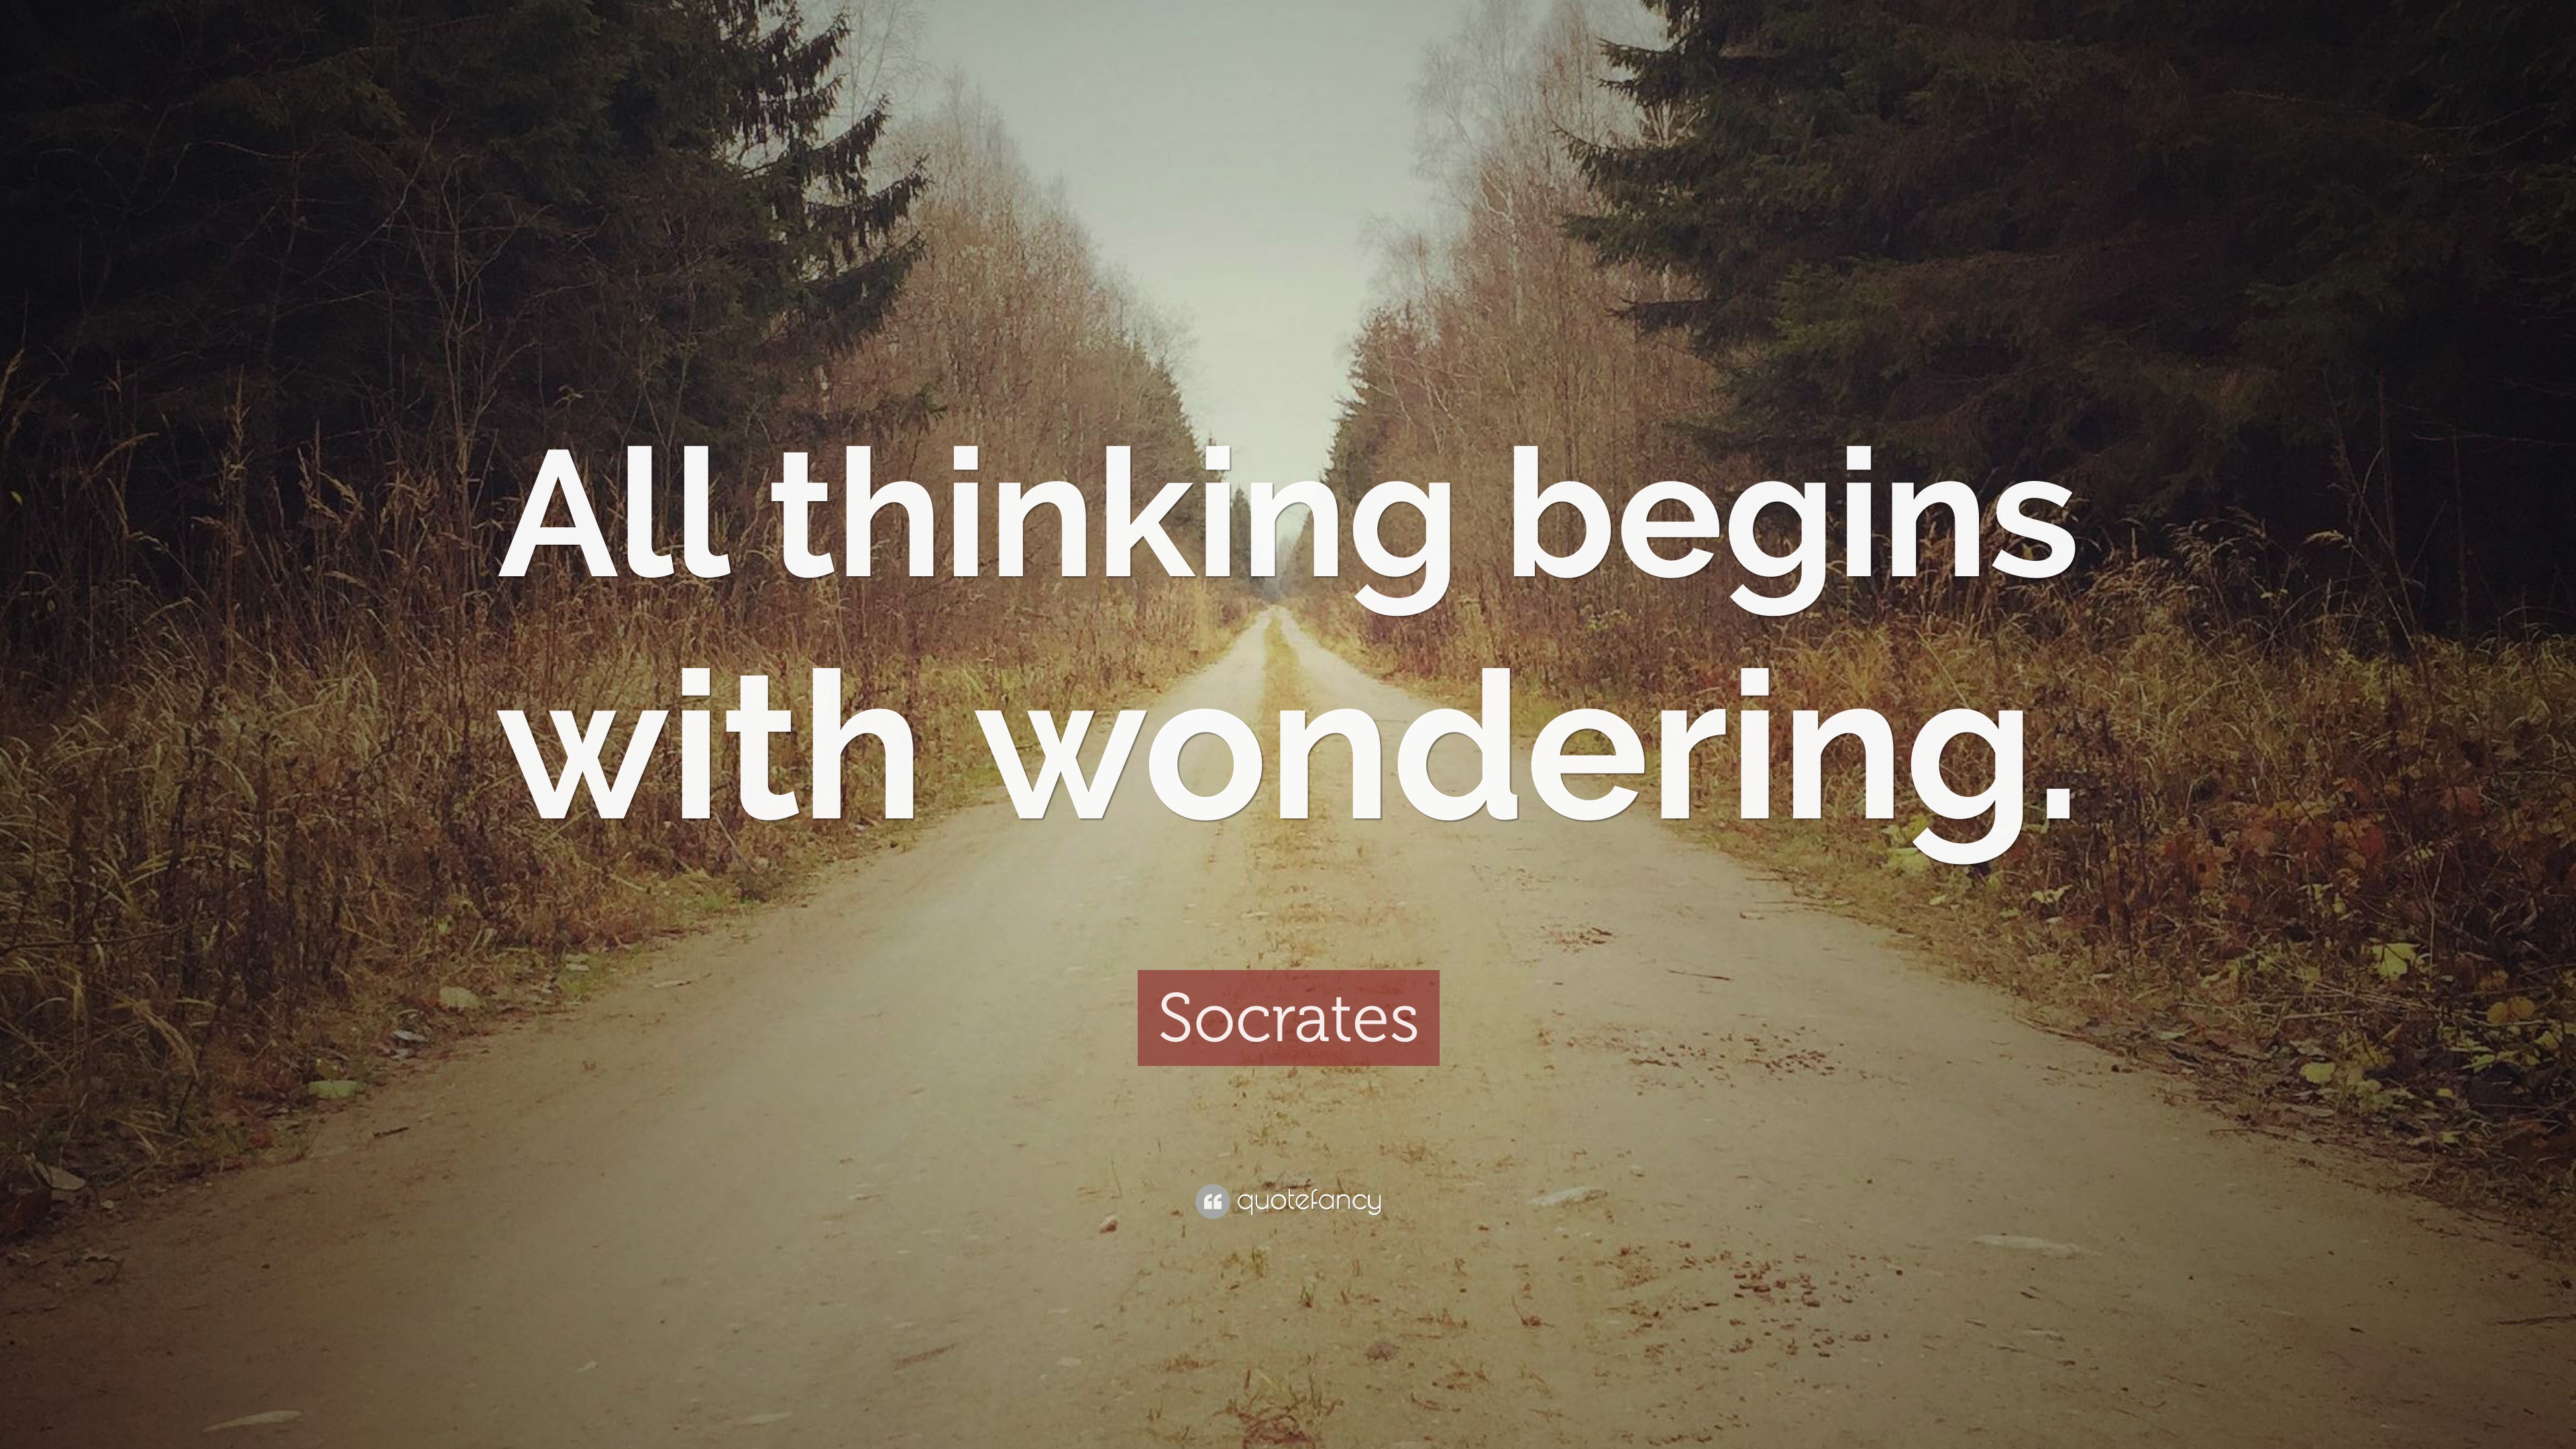 socrates quotes about critical thinking